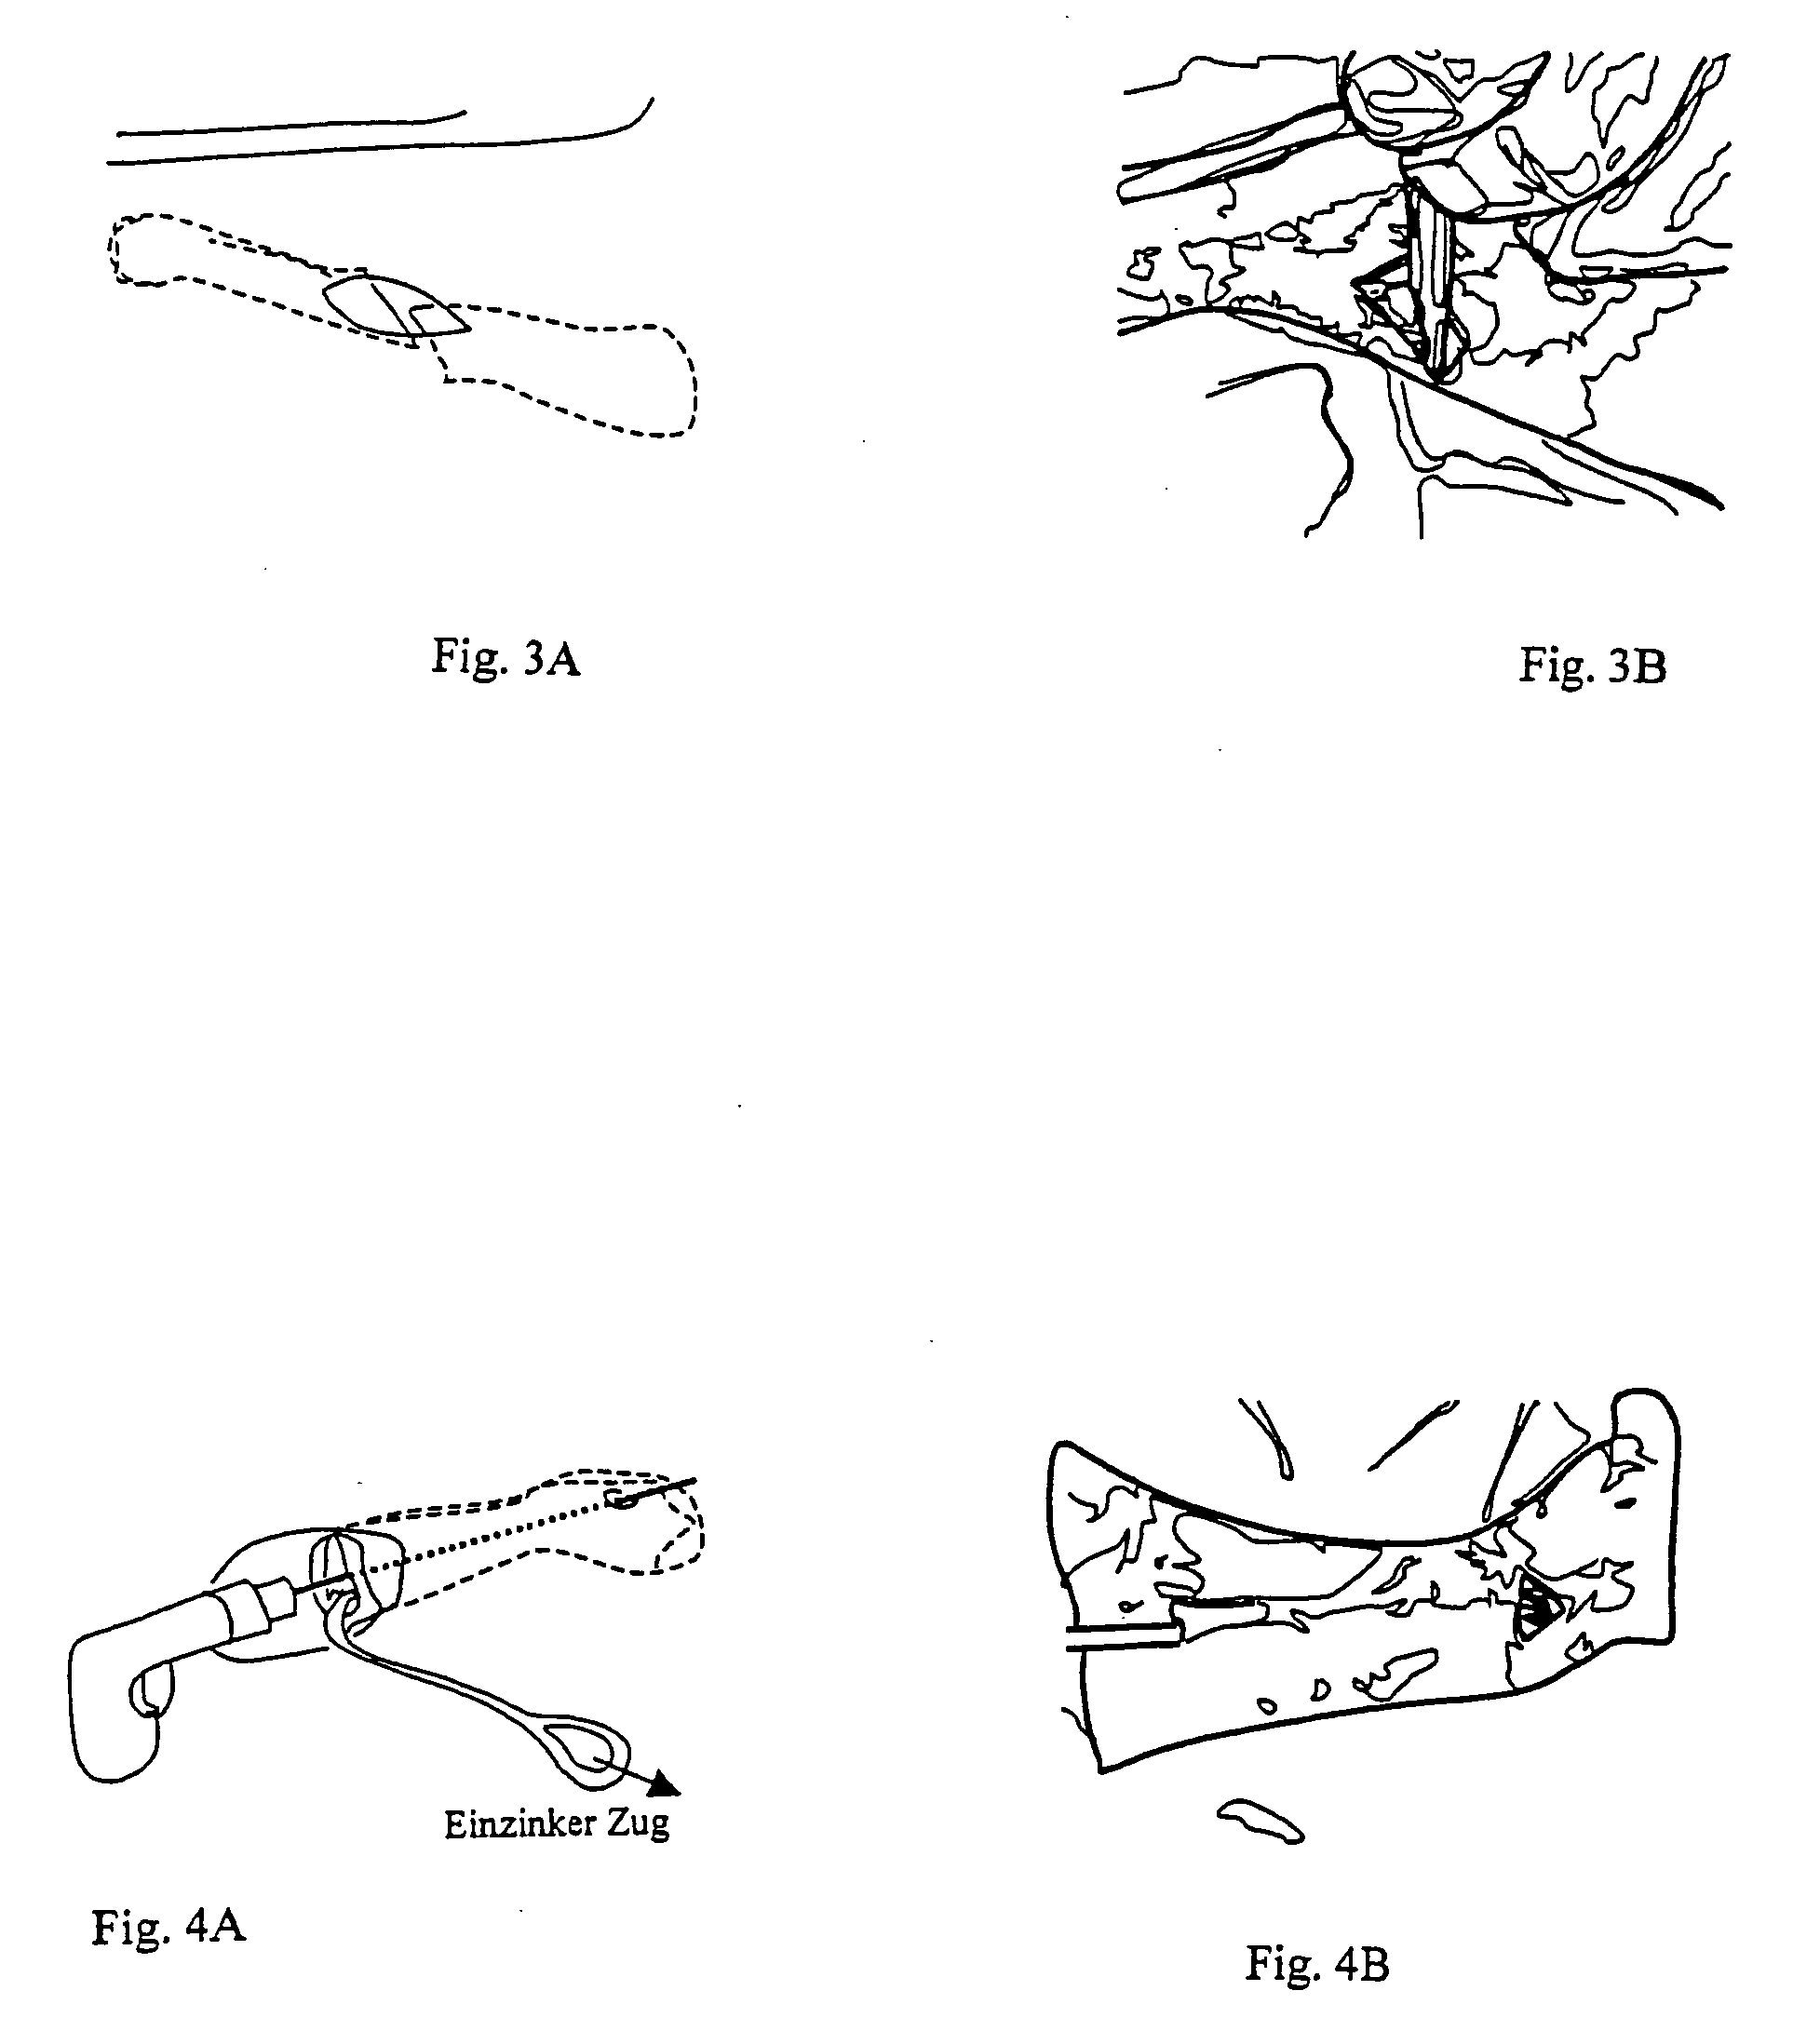 Implant for long bones and treatment method